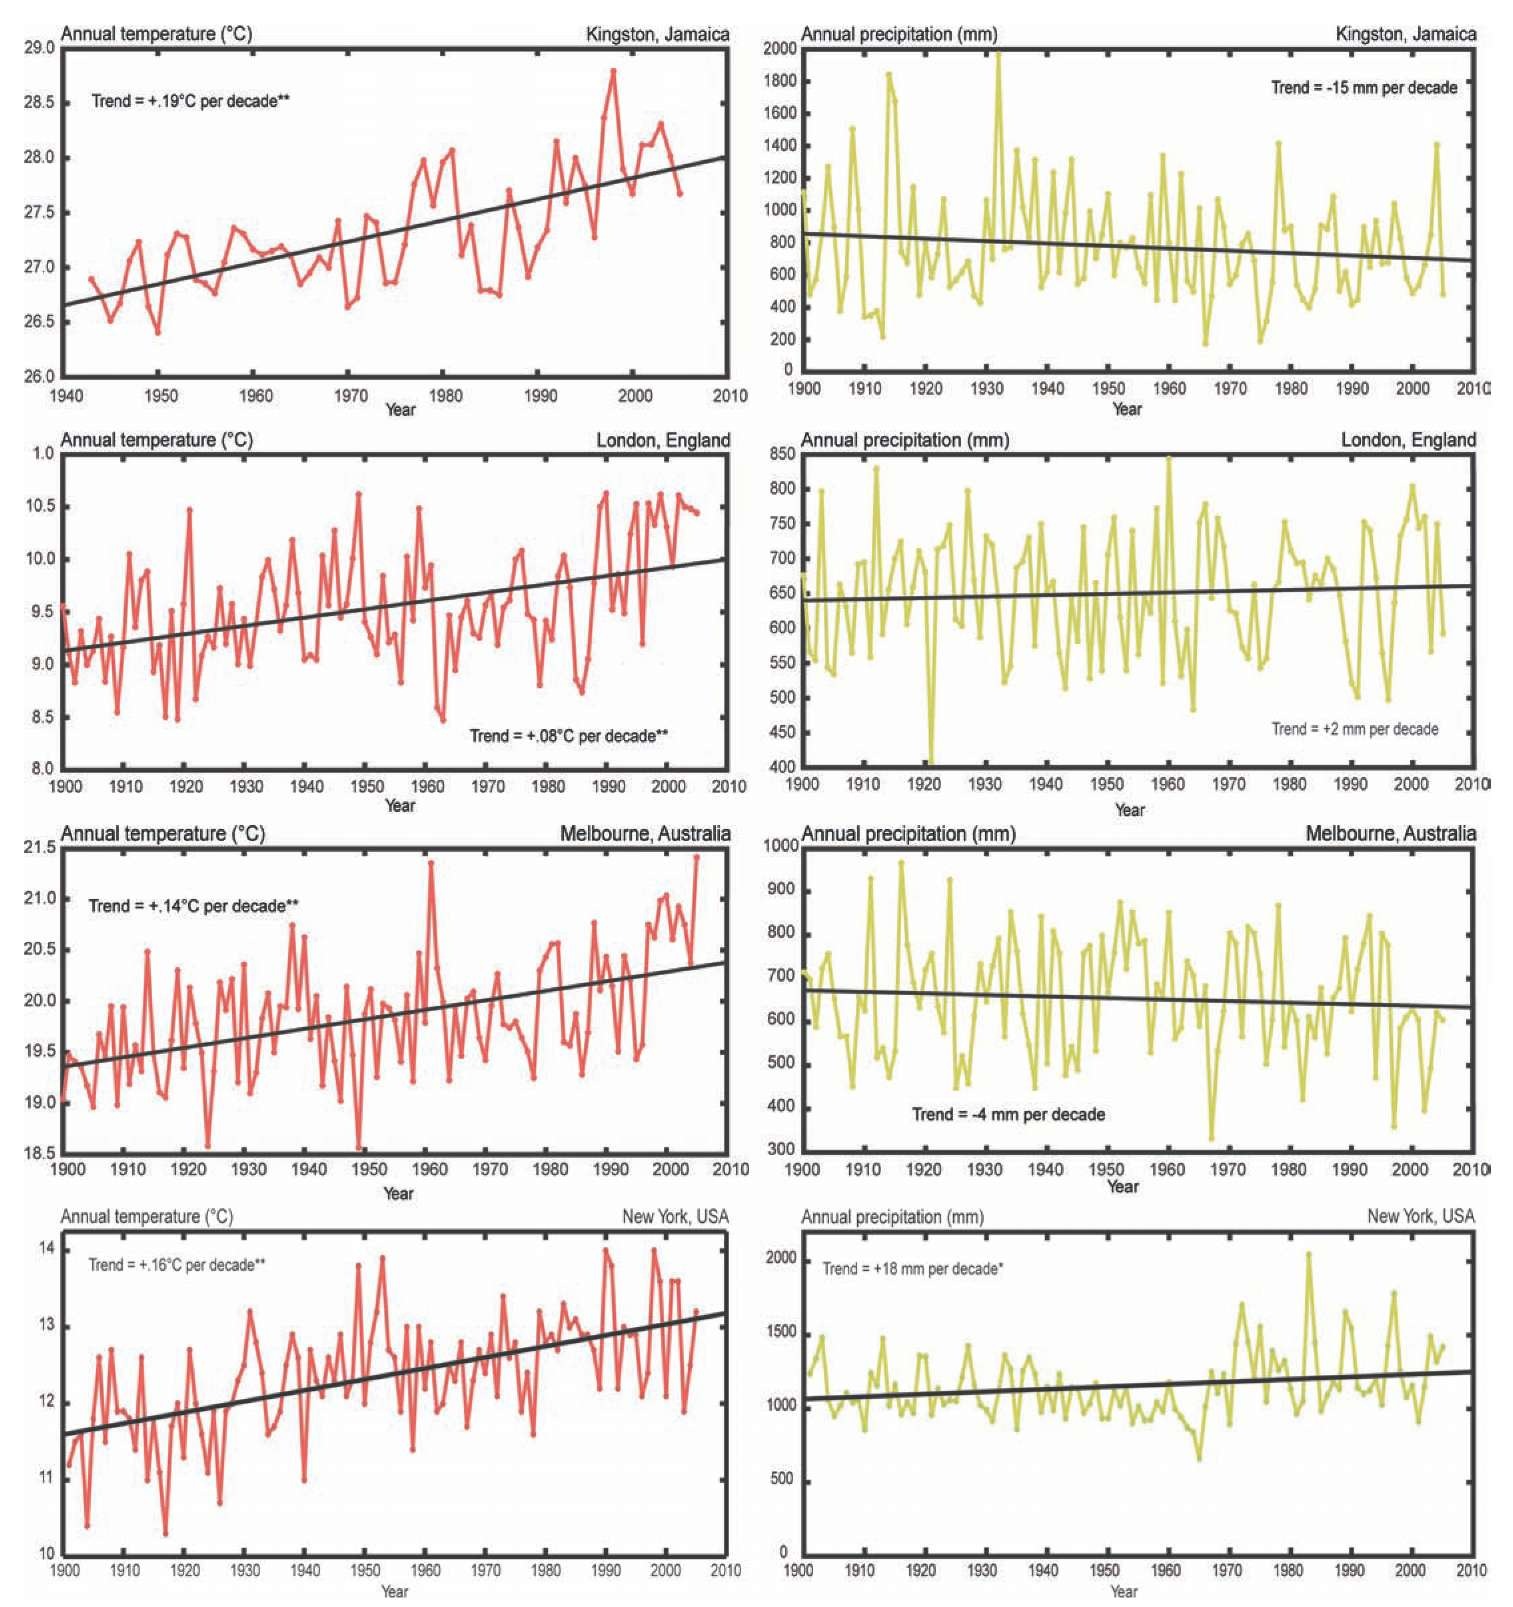 Observed climate trends in cities. Trends and statistical significance are shown for the data available for the twentieth century (see Table 3.2 for specific years for each city). Note differences in temperature and precipitation scales. 